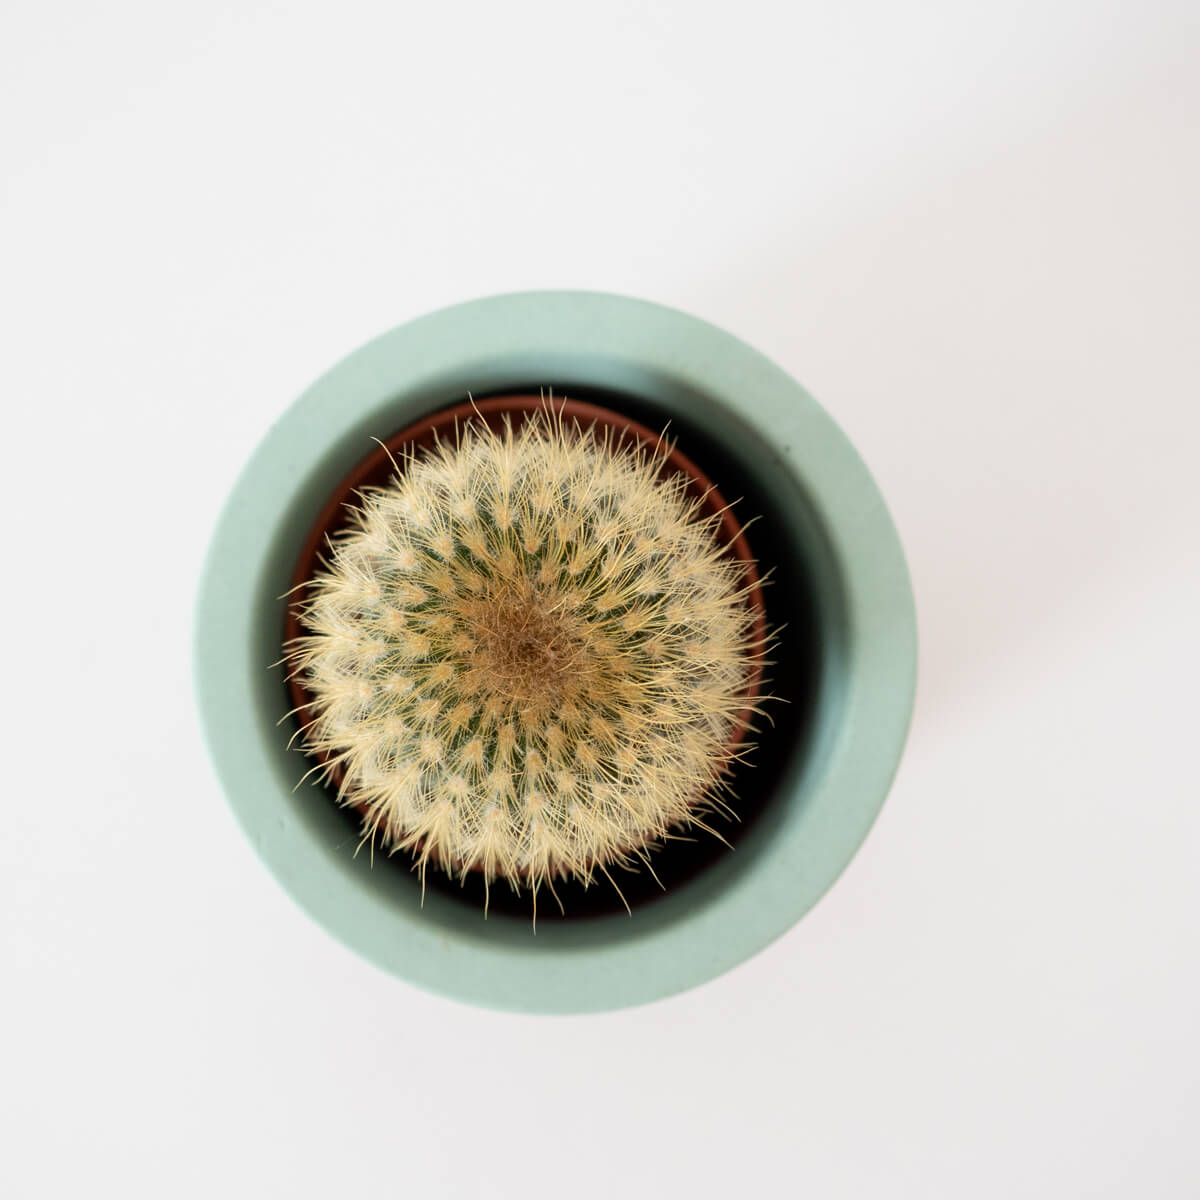 Birds eye view of the small round concrete planter with a mini cactus in to show scale.